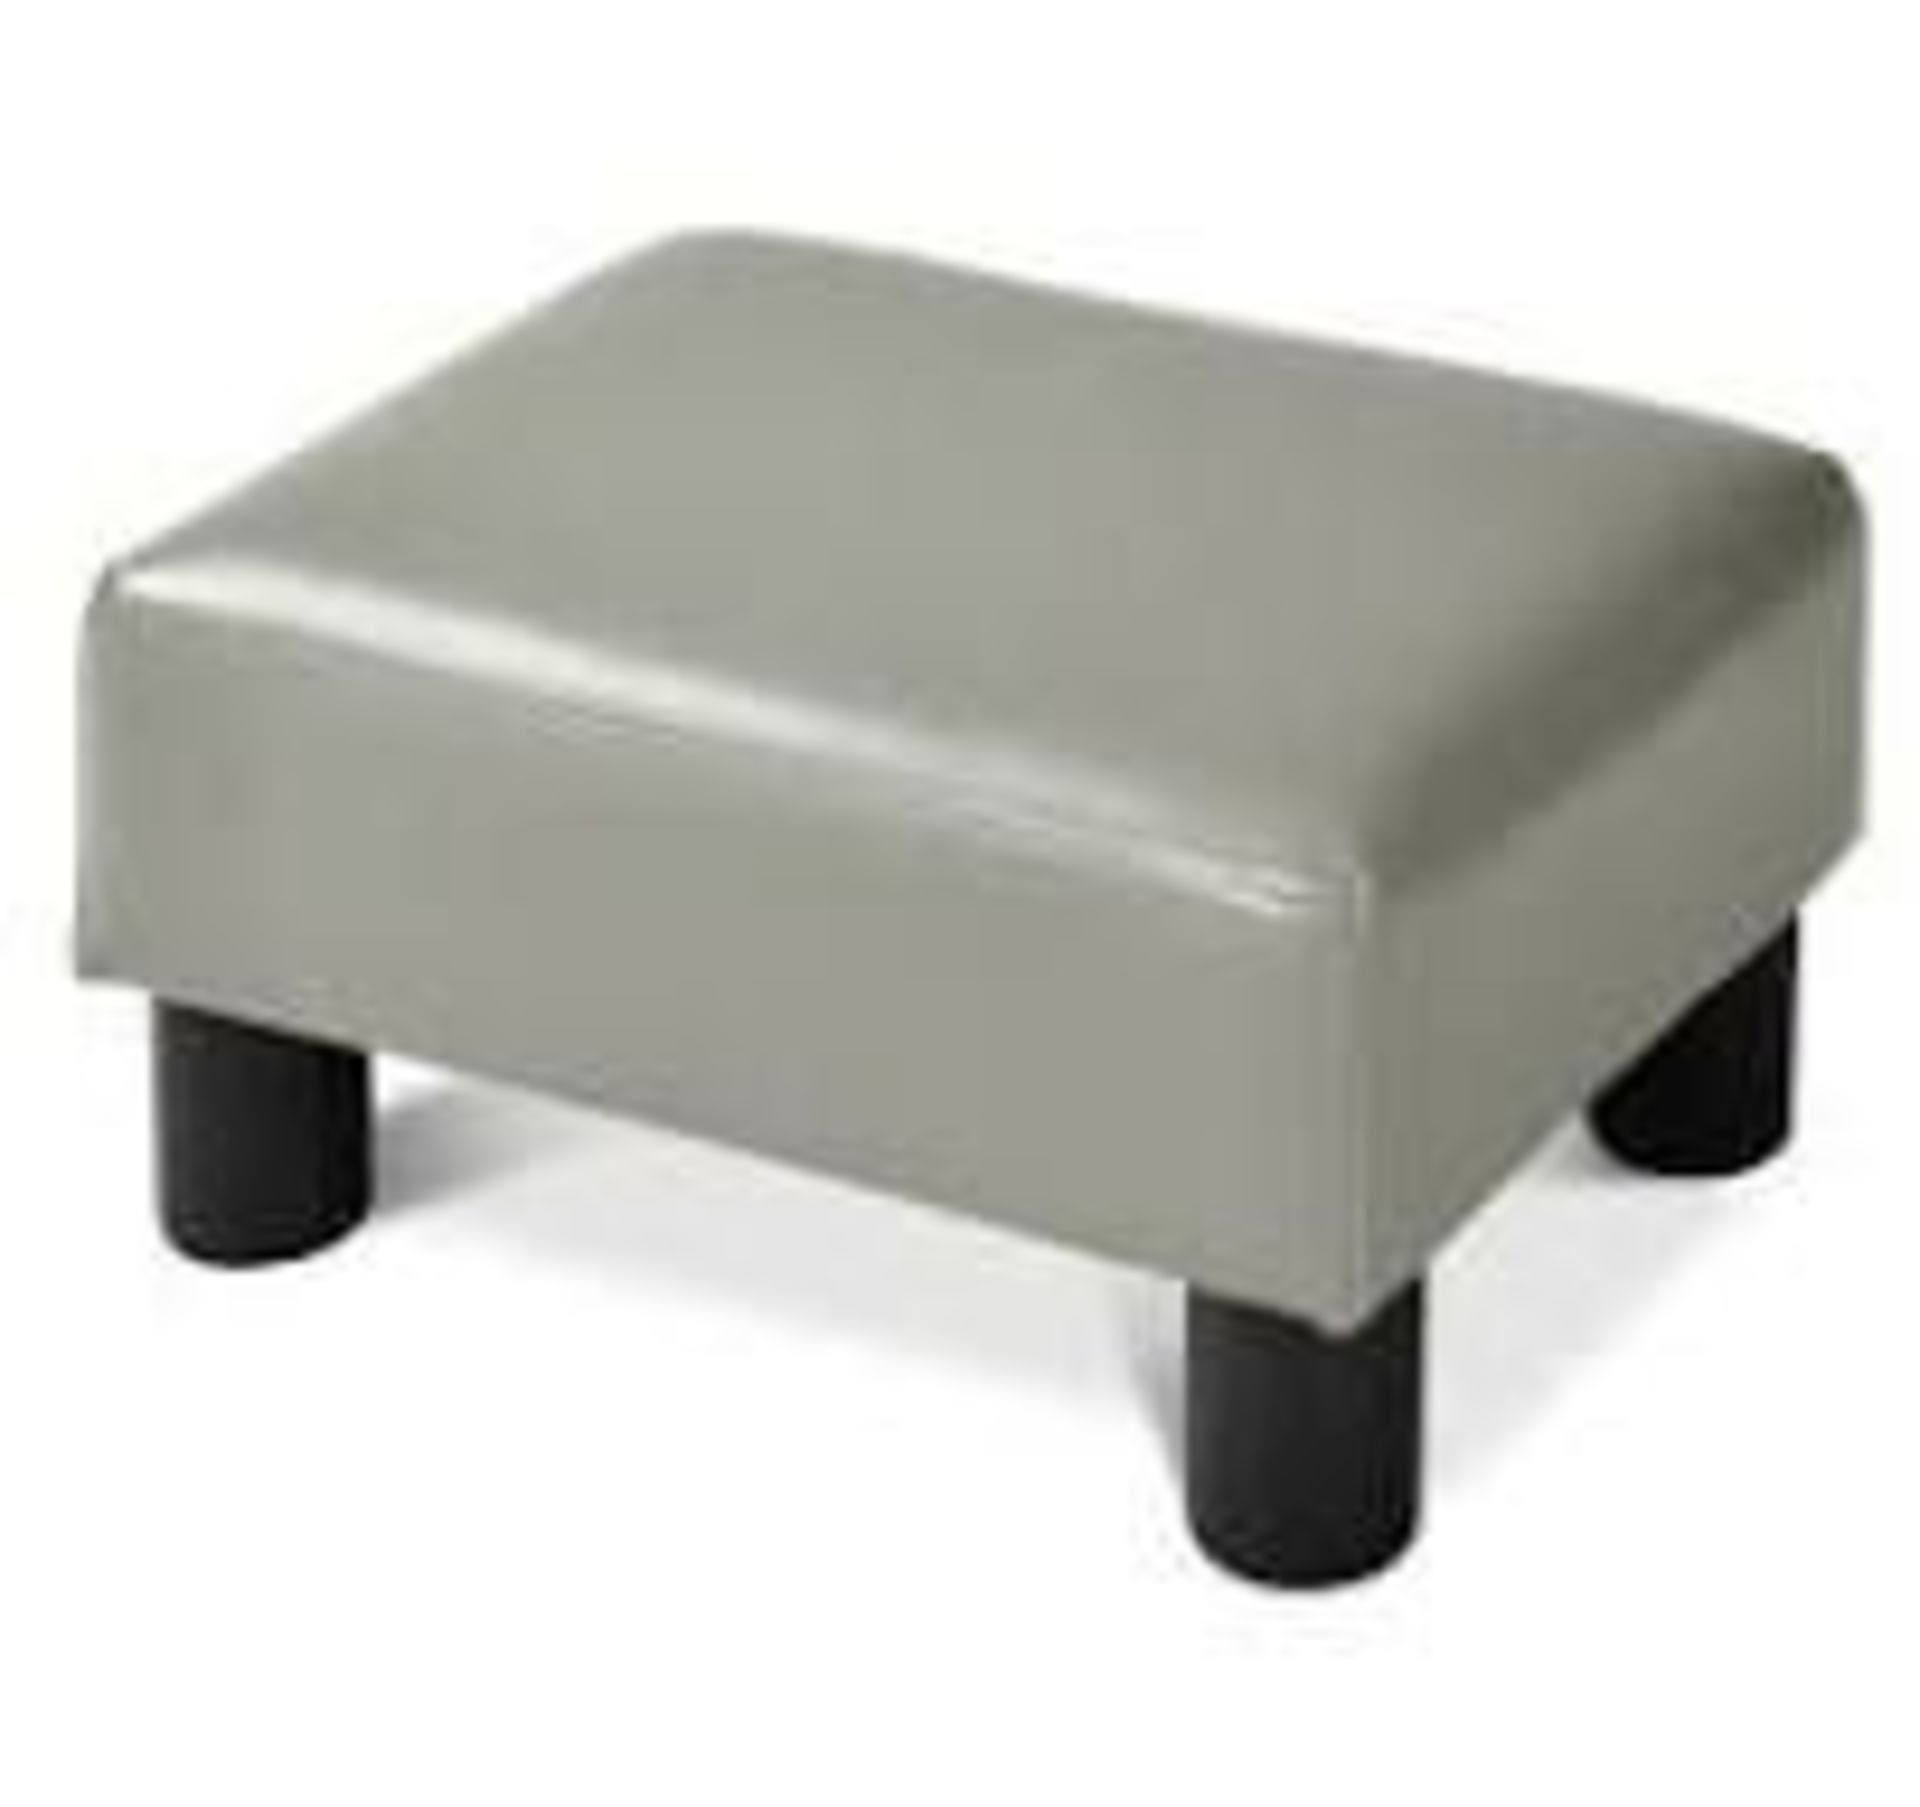 40 cm Rectangle PU Leather Small Footstool Ottoman-Grey. - ER53. This PU leather footstool with soft